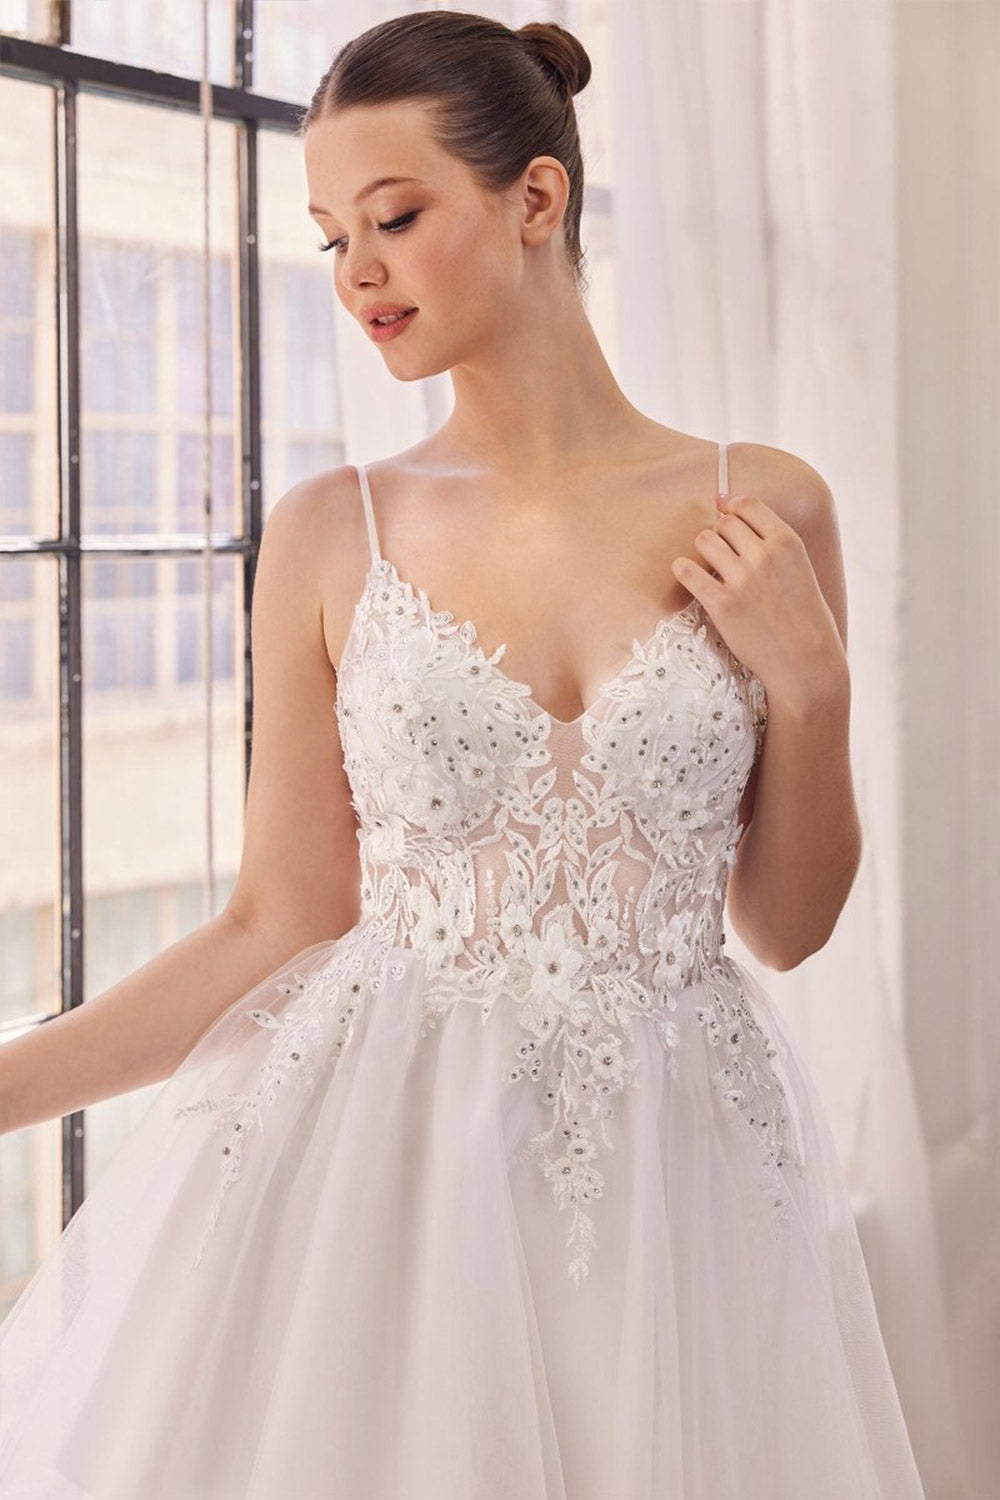 Danna | Short Sparkly White Dress w/ Embroidery